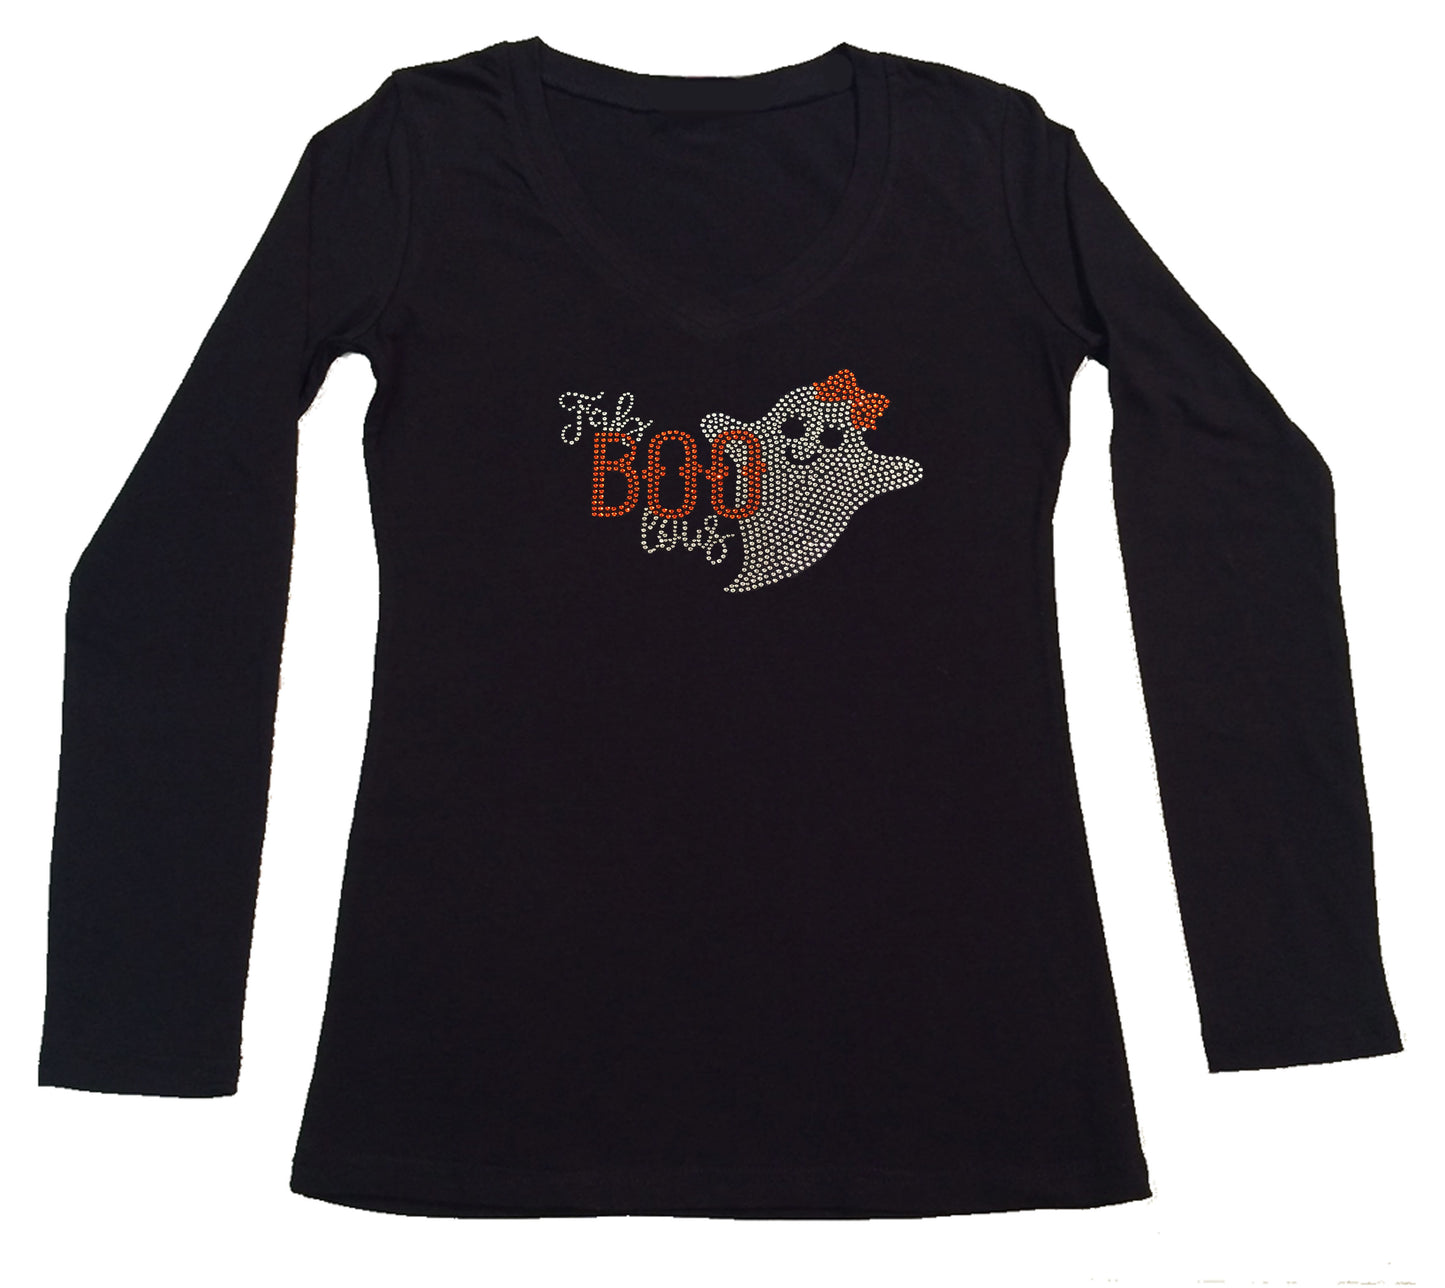 Womens T-shirt with Halloween Ghost Fab Boo lous in Rhinestones